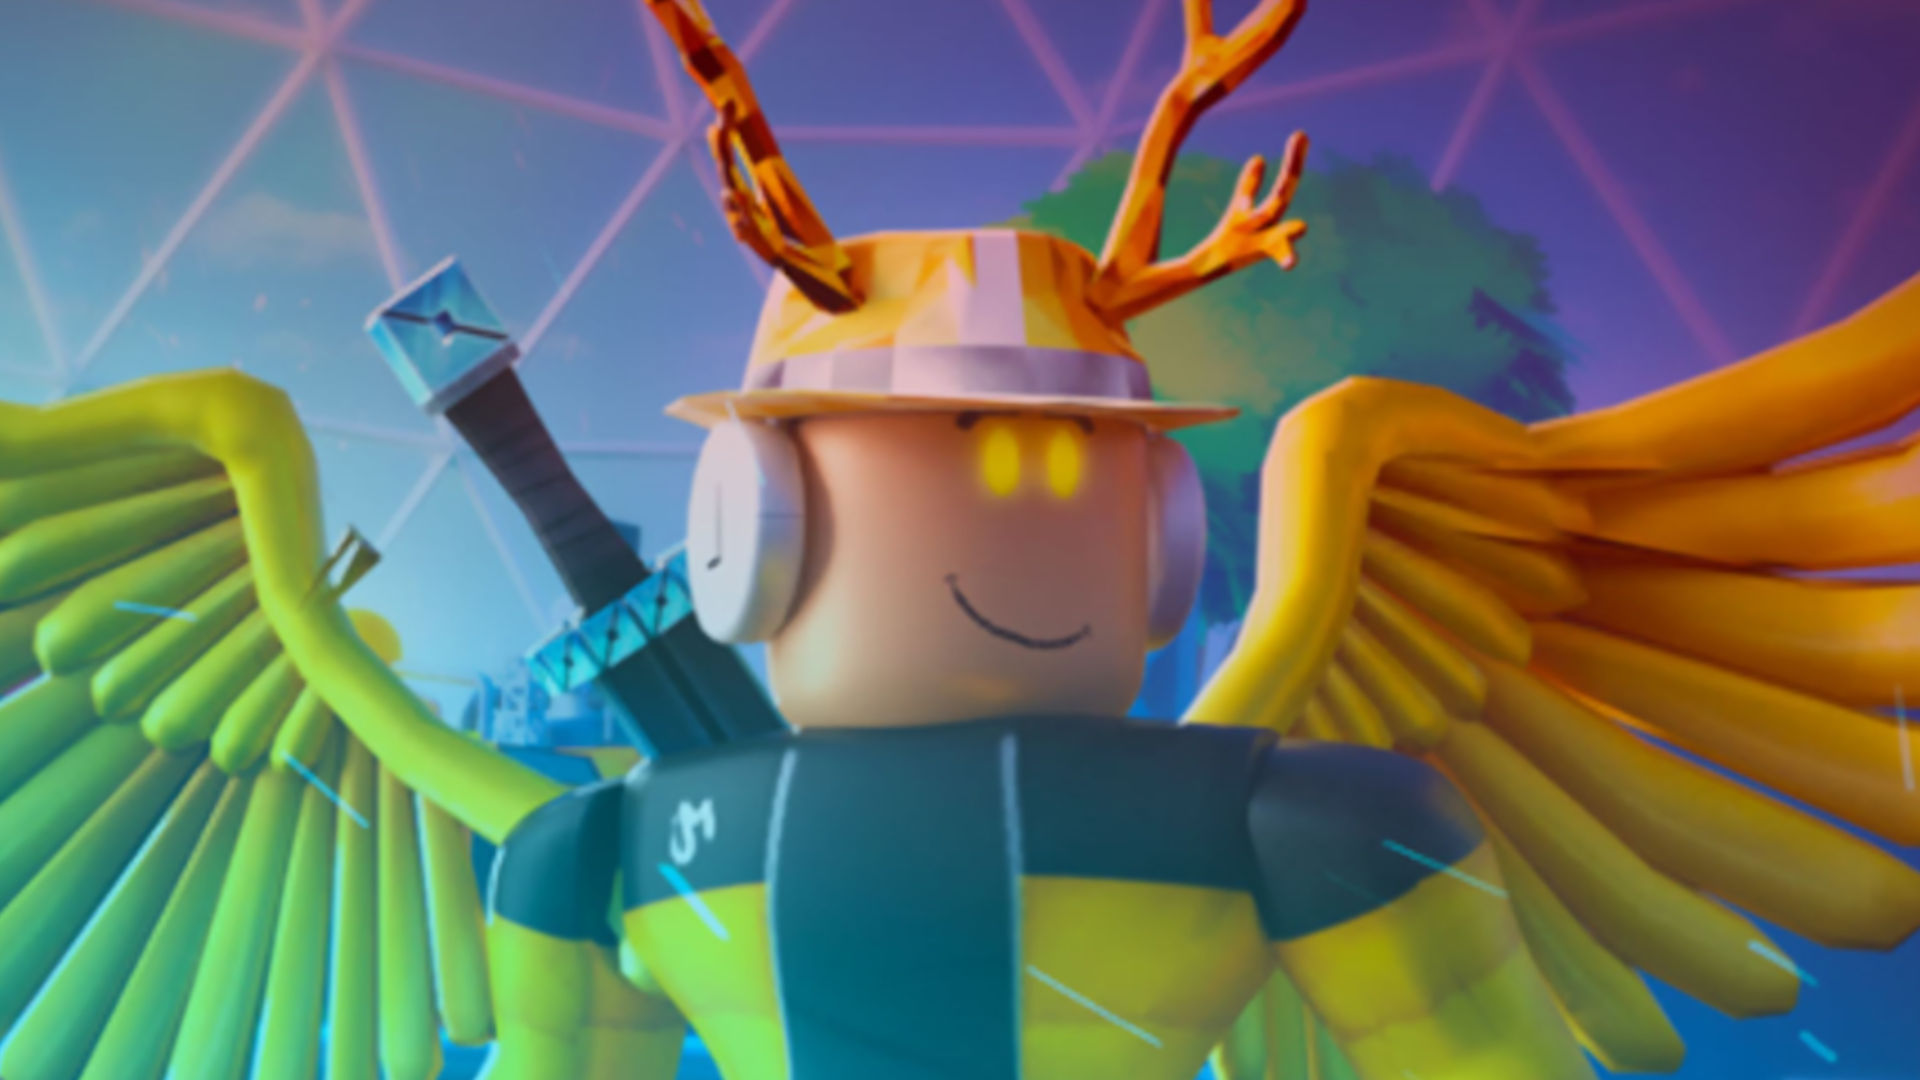 Roblox Sword Fighters Simulator Codes (August 2023): Free Boosts